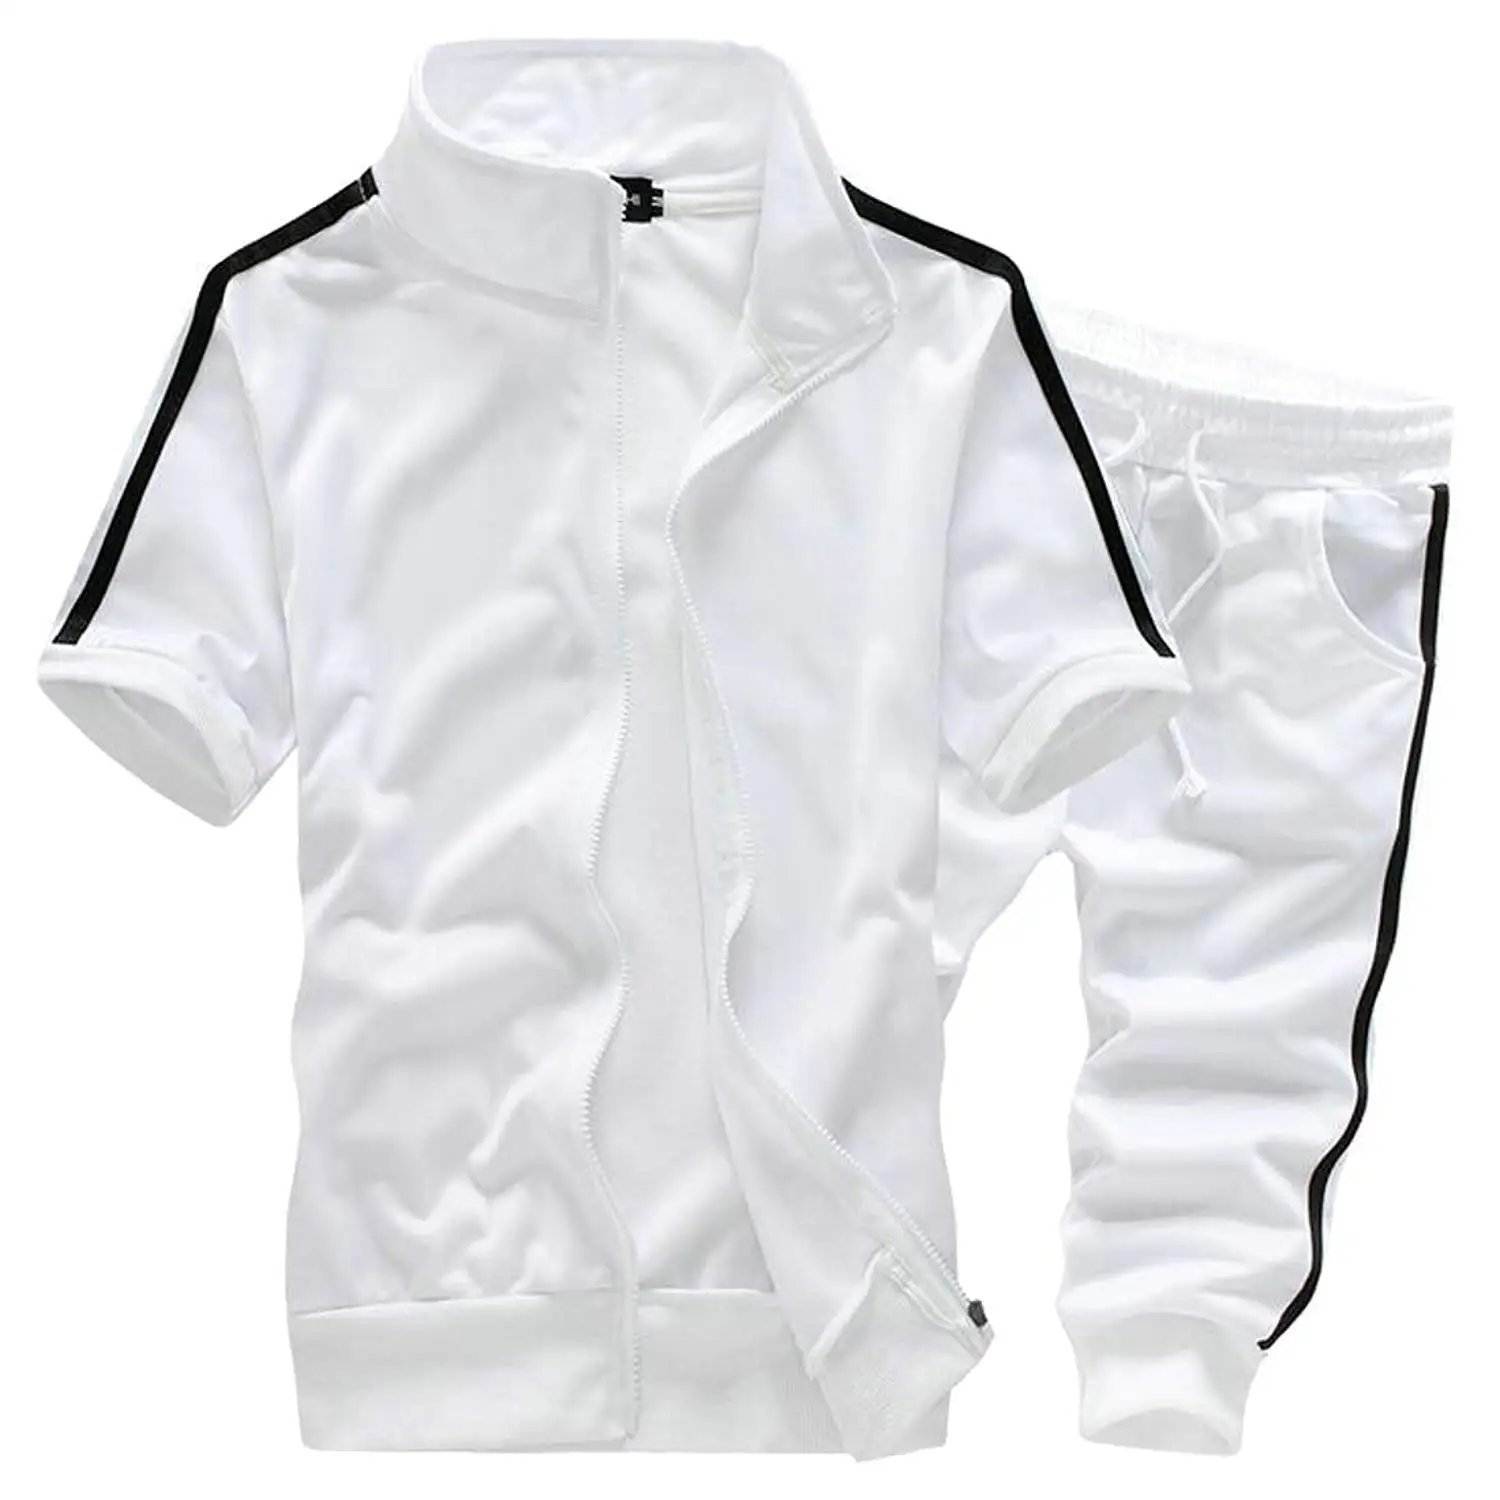 Cheap Replica Tracksuits, find Replica Tracksuits deals on line at ...